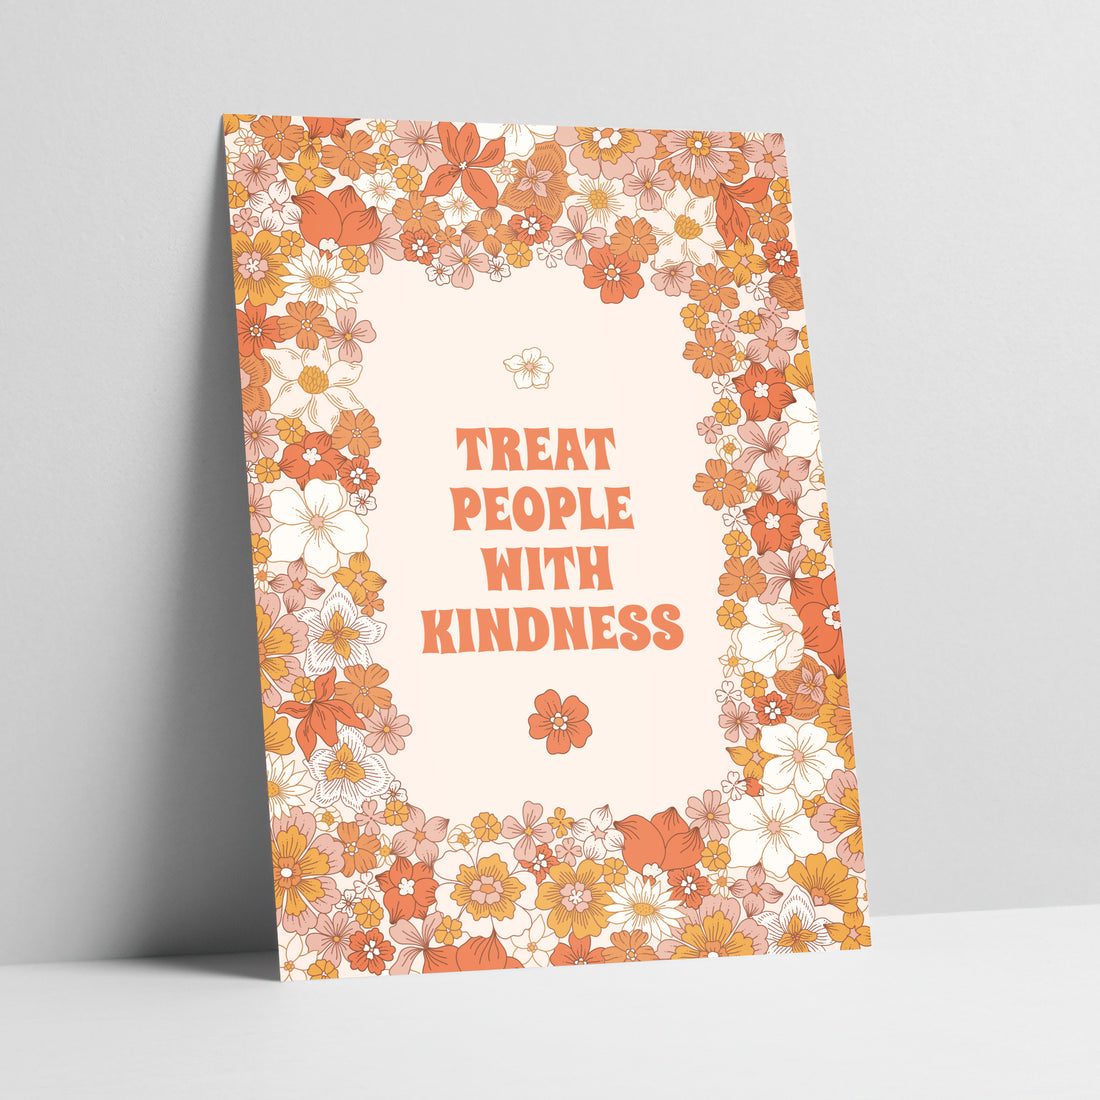 Treat People With Kindness Art Print